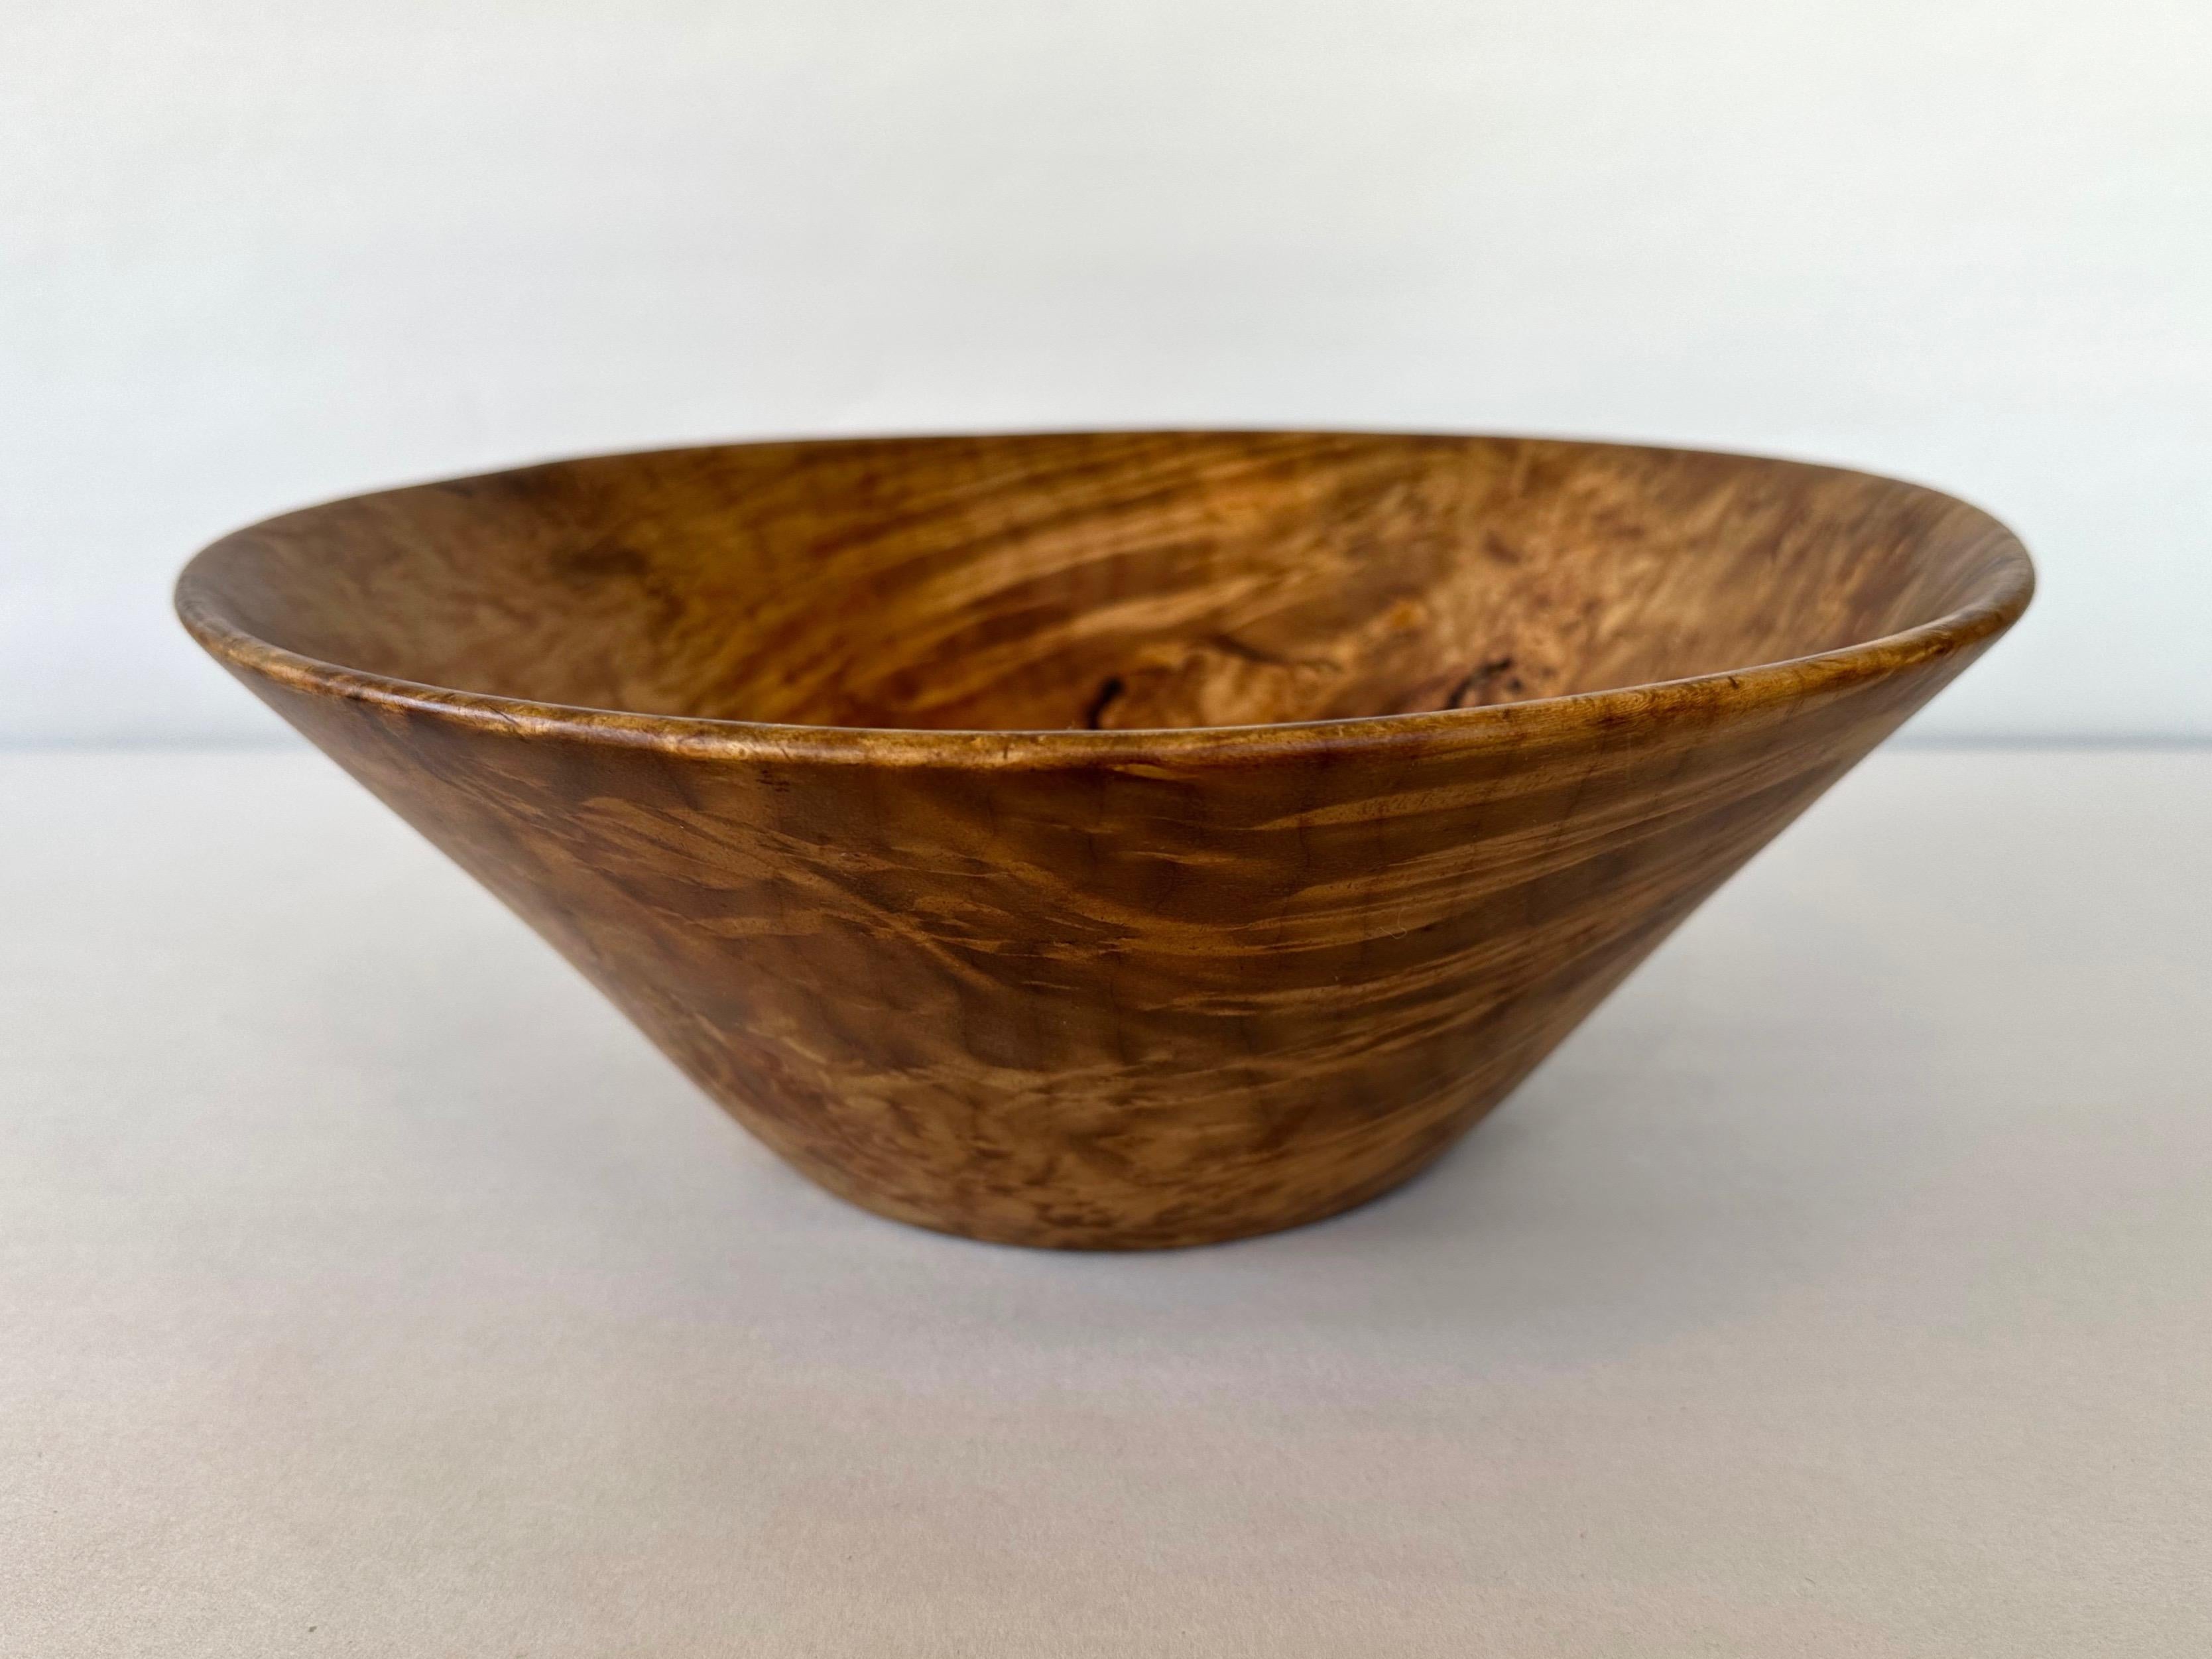 Bruce Mitchell Bay Laurel Burl Turned Wood Bowl, 1979 In Good Condition For Sale In San Francisco, CA